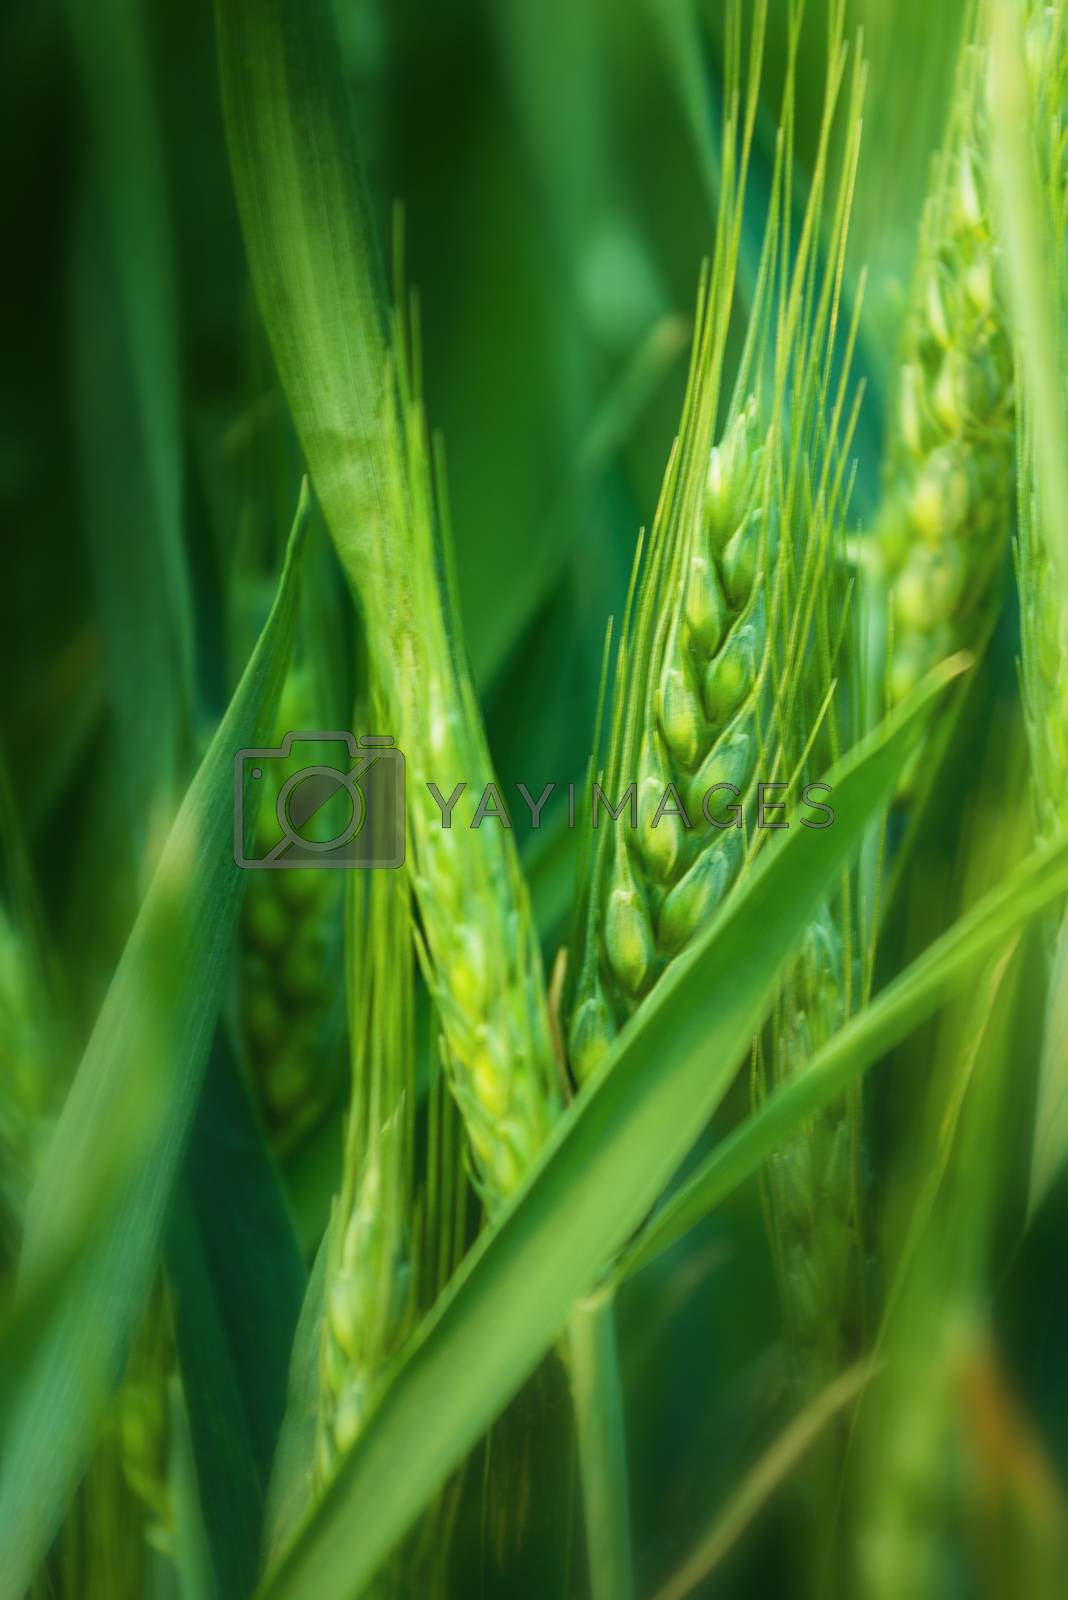 Royalty free image of Green Wheat Head in Cultivated Agricultural Field by stevanovicigor